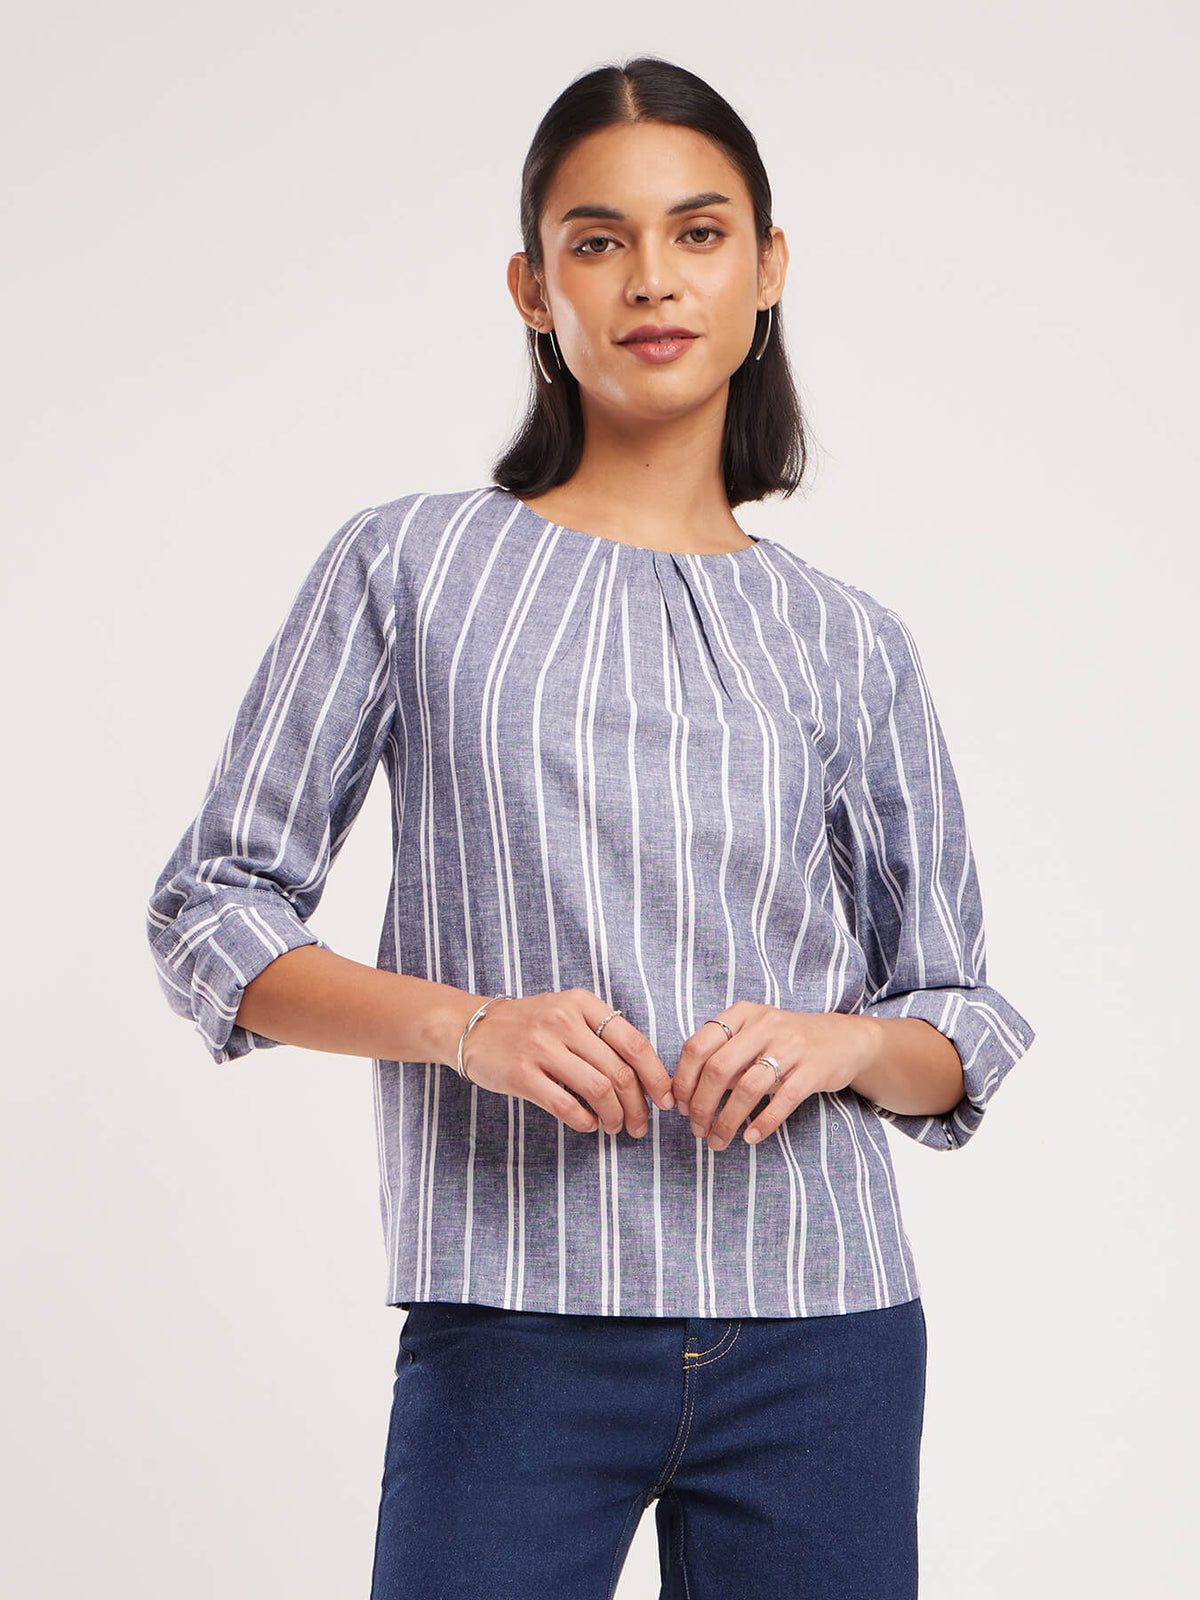 Cotton Vertical Stripes Top - Blue And White